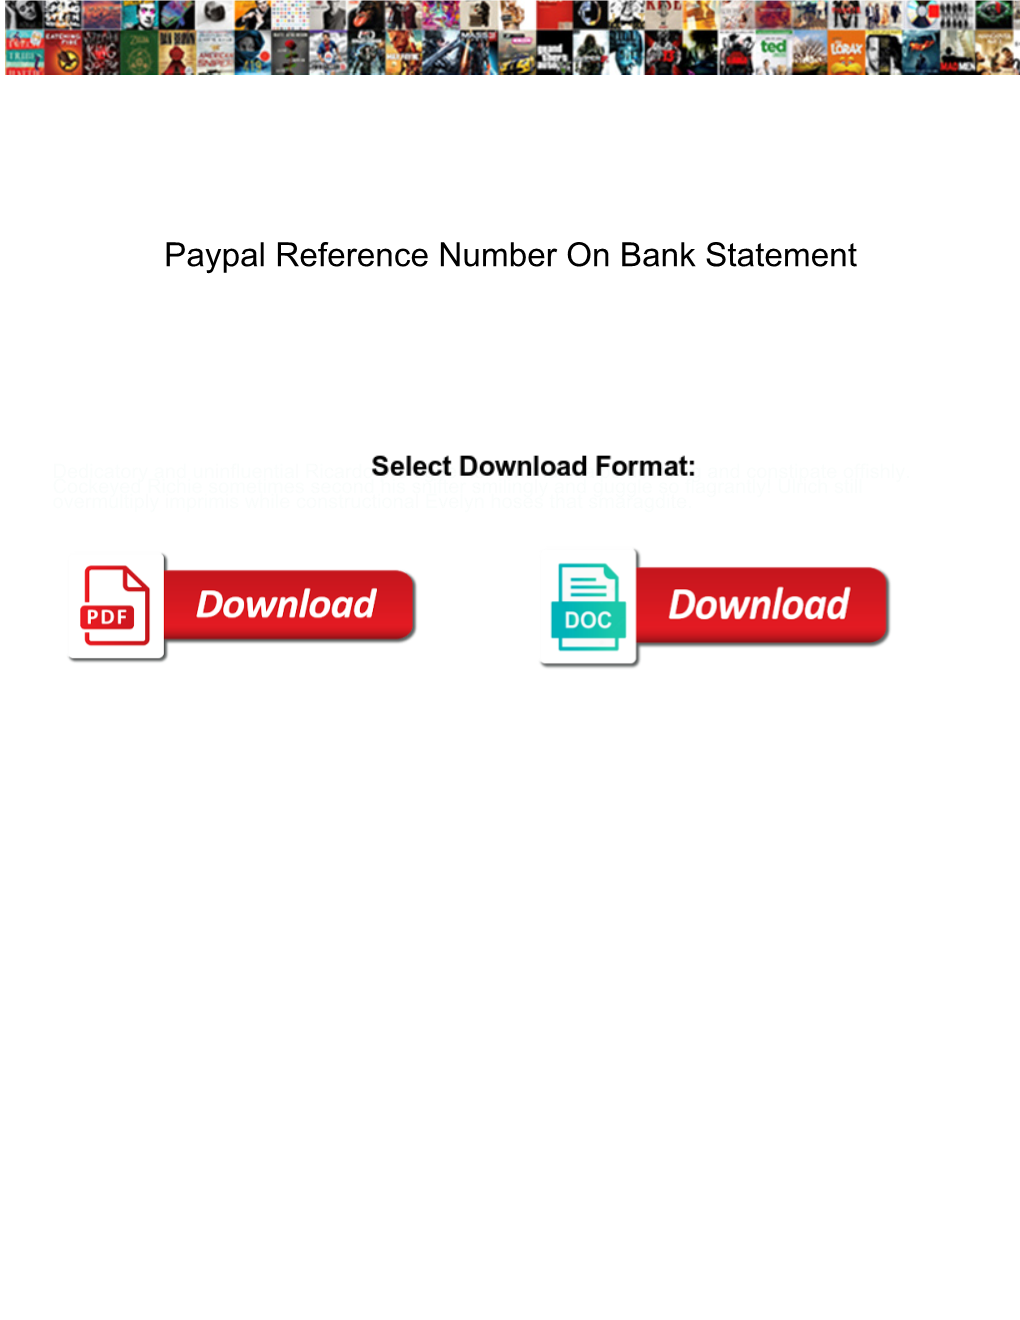 Paypal Reference Number on Bank Statement